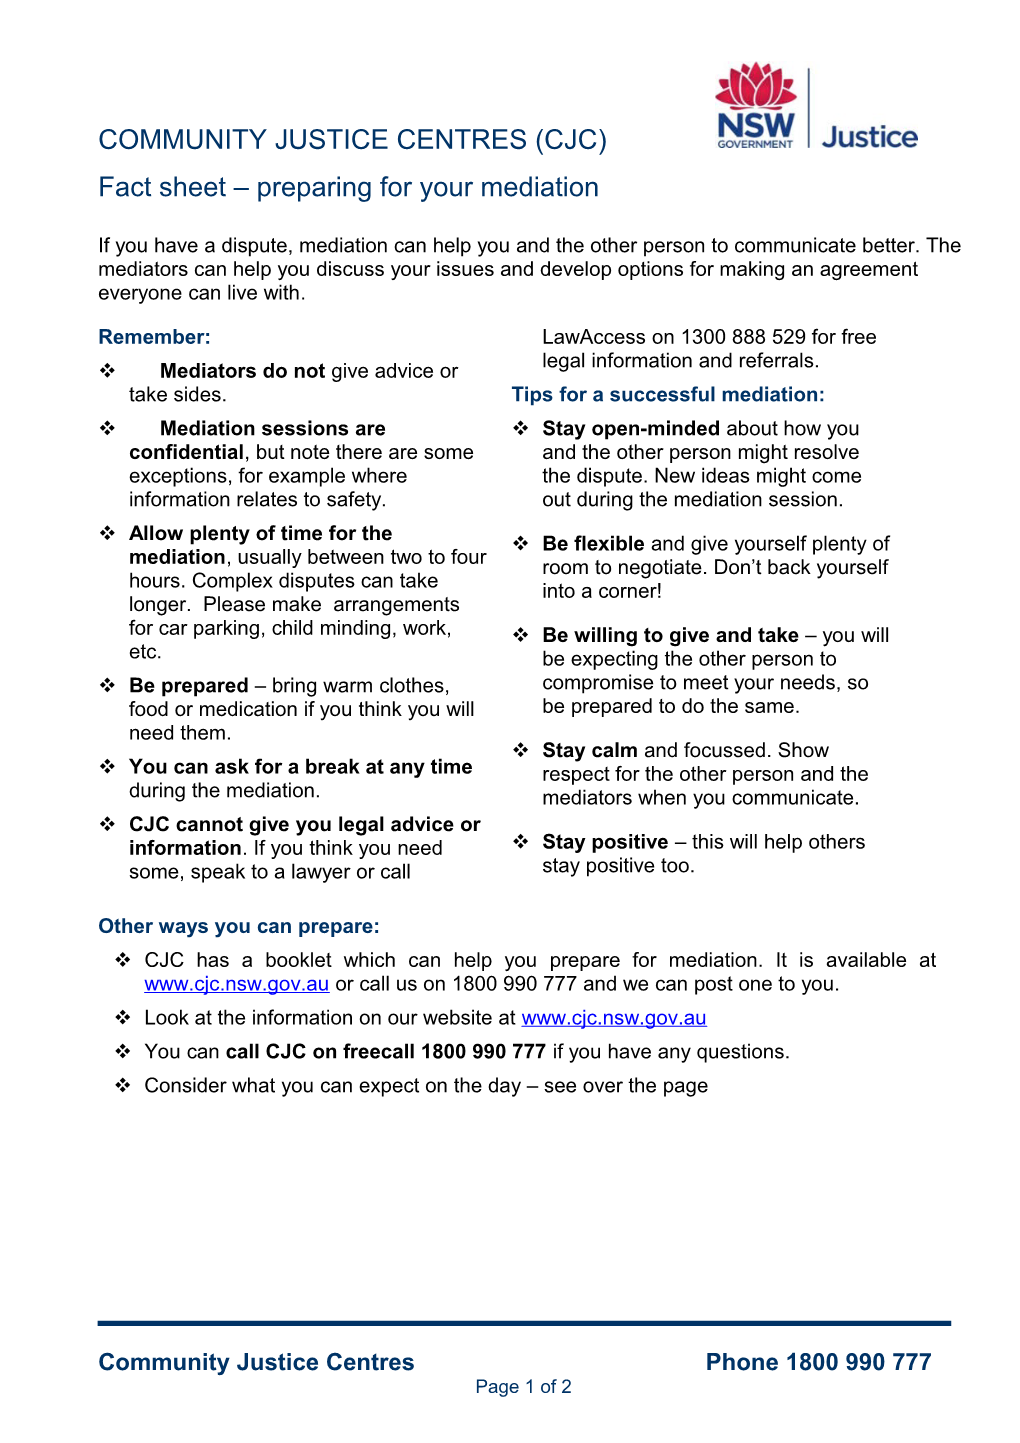 CJC Fact Sheet - Preparing for Your Medition